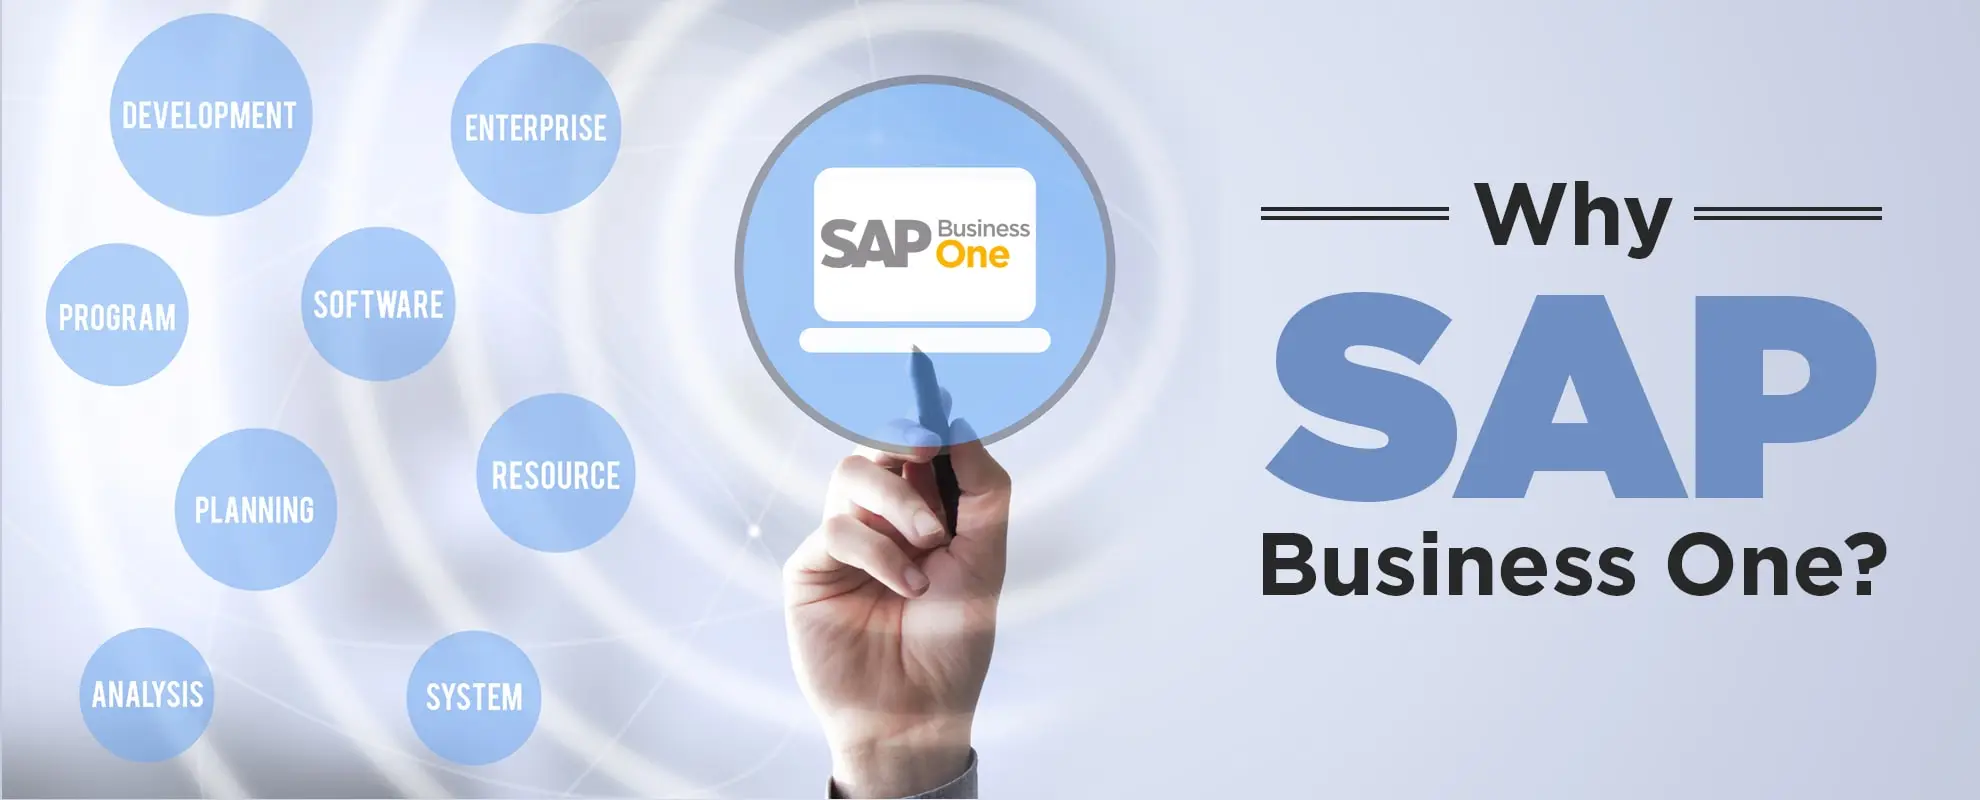 Why SAP Business One